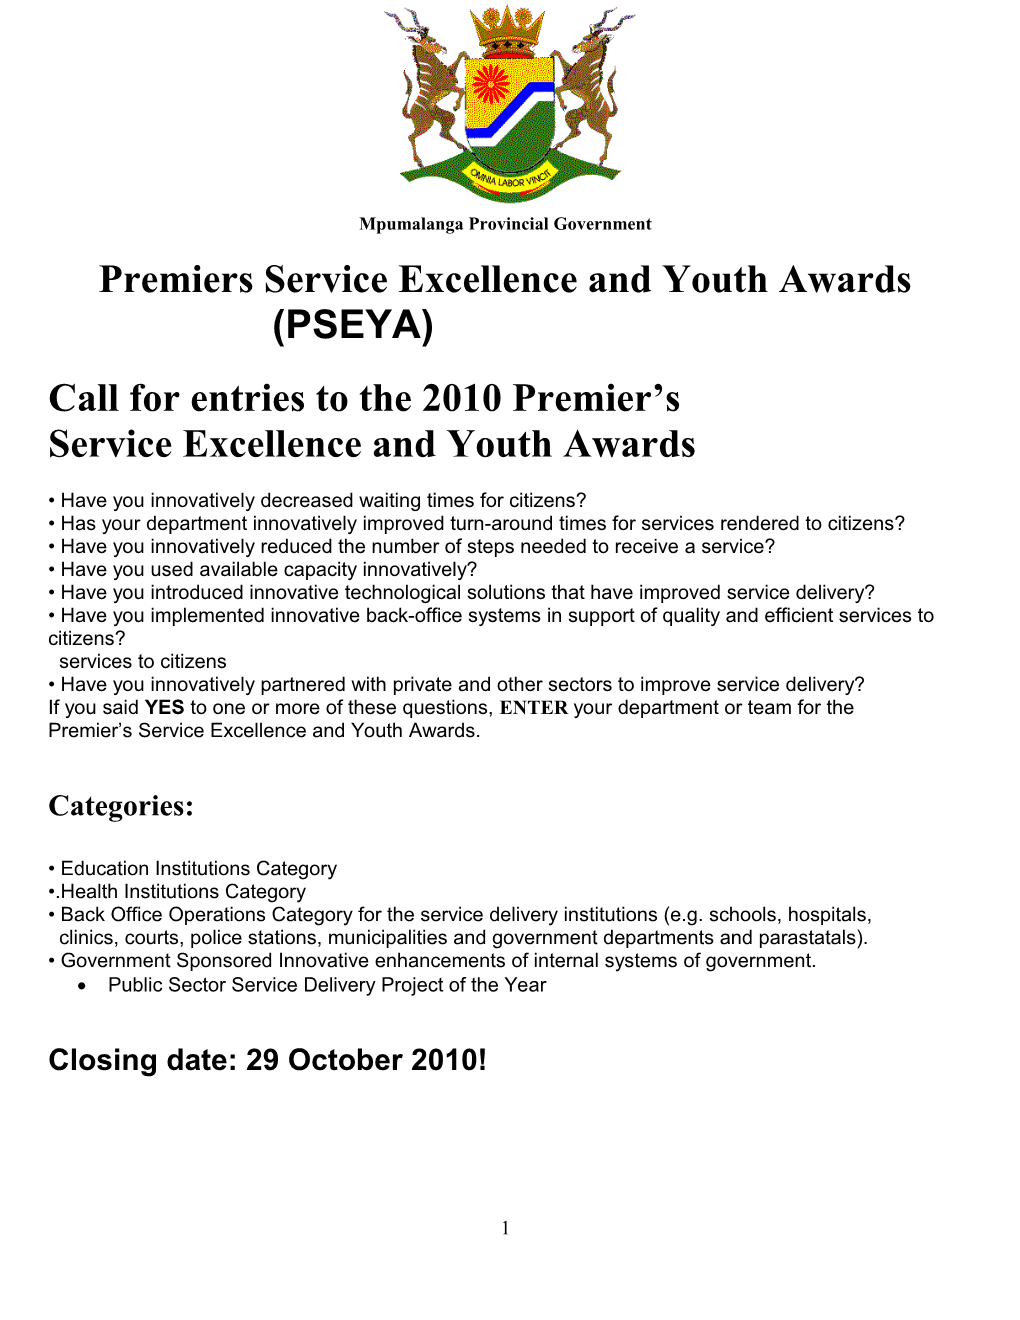 Premiers Service Excellence and Youth Awards (PSEYA)